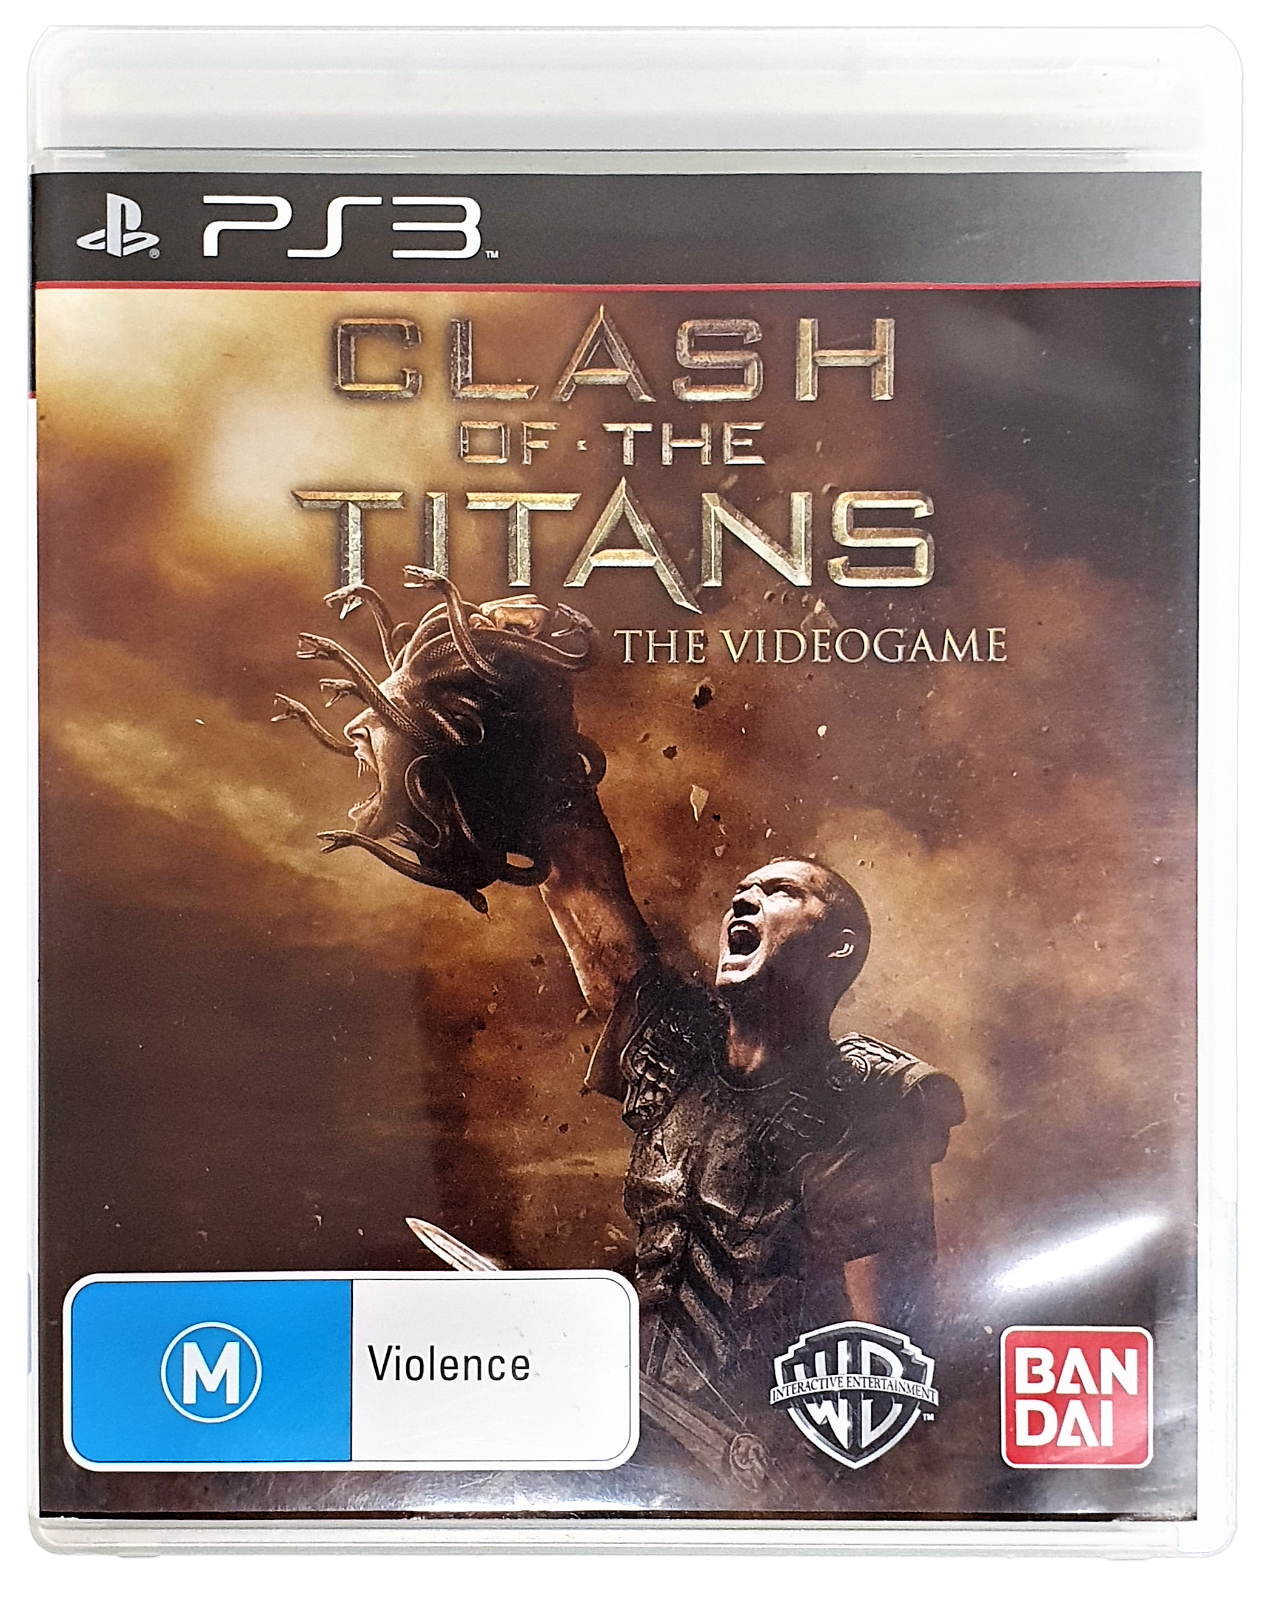 Clash Of The Titans Sony PS3 PlayStation 3 (Pre-Owned)